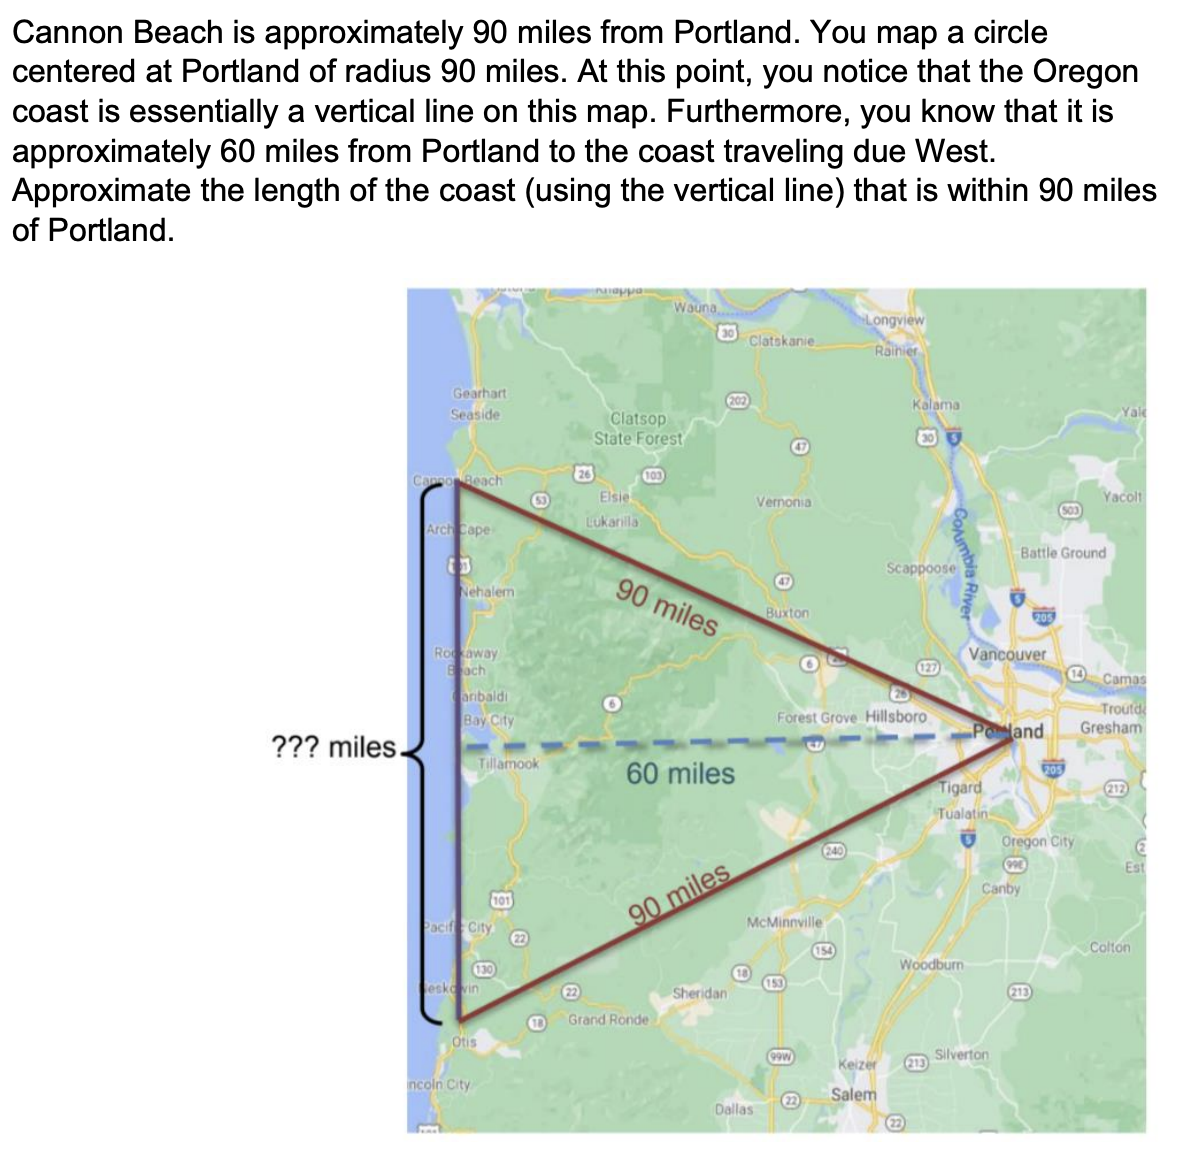 Cannon Beach is approximately 90 miles from Portland. You map a circle
centered at Portland of radius 90 miles. At this point, you notice that the Oregon
coast is essentially a vertical line on this map. Furthermore, you know that it is
approximately 60 miles from Portland to the coast traveling due West.
Approximate the length of the coast (using the vertical line) that is within 90 miles
of Portland.
??? miles.
Gearhart
Seaside
Cappor Beach
Arch Cape
Nehalem.
Rockaway
Each
aribaldi
Bay City
Tillamook
Pacife City
130
esko vin
incoln City
Otis
22
D
26
napp
Clatsop
State Forest
Elsie
Lukarilla
103
O
Wauna,
90 miles
60 miles
90 miles
Grand Ronde
Sheridan
Clatskanie
Dallas
Vernonia
47
Buxton
McMinnville
153
99W
22
Longview
Rainier
Forest Grove Hillsboro
154
Kalama
30 3
Scappoose
127
22
Woodburn
Keizer 213
Salem
Vancouver
Tigard
Tualatin
Poland
Battle Ground
Silverton
Canby
503
Oregon City
990
(213
Yak
Yacolt
14 Camas
Troutd
Gresham
212
2
Est
Colton